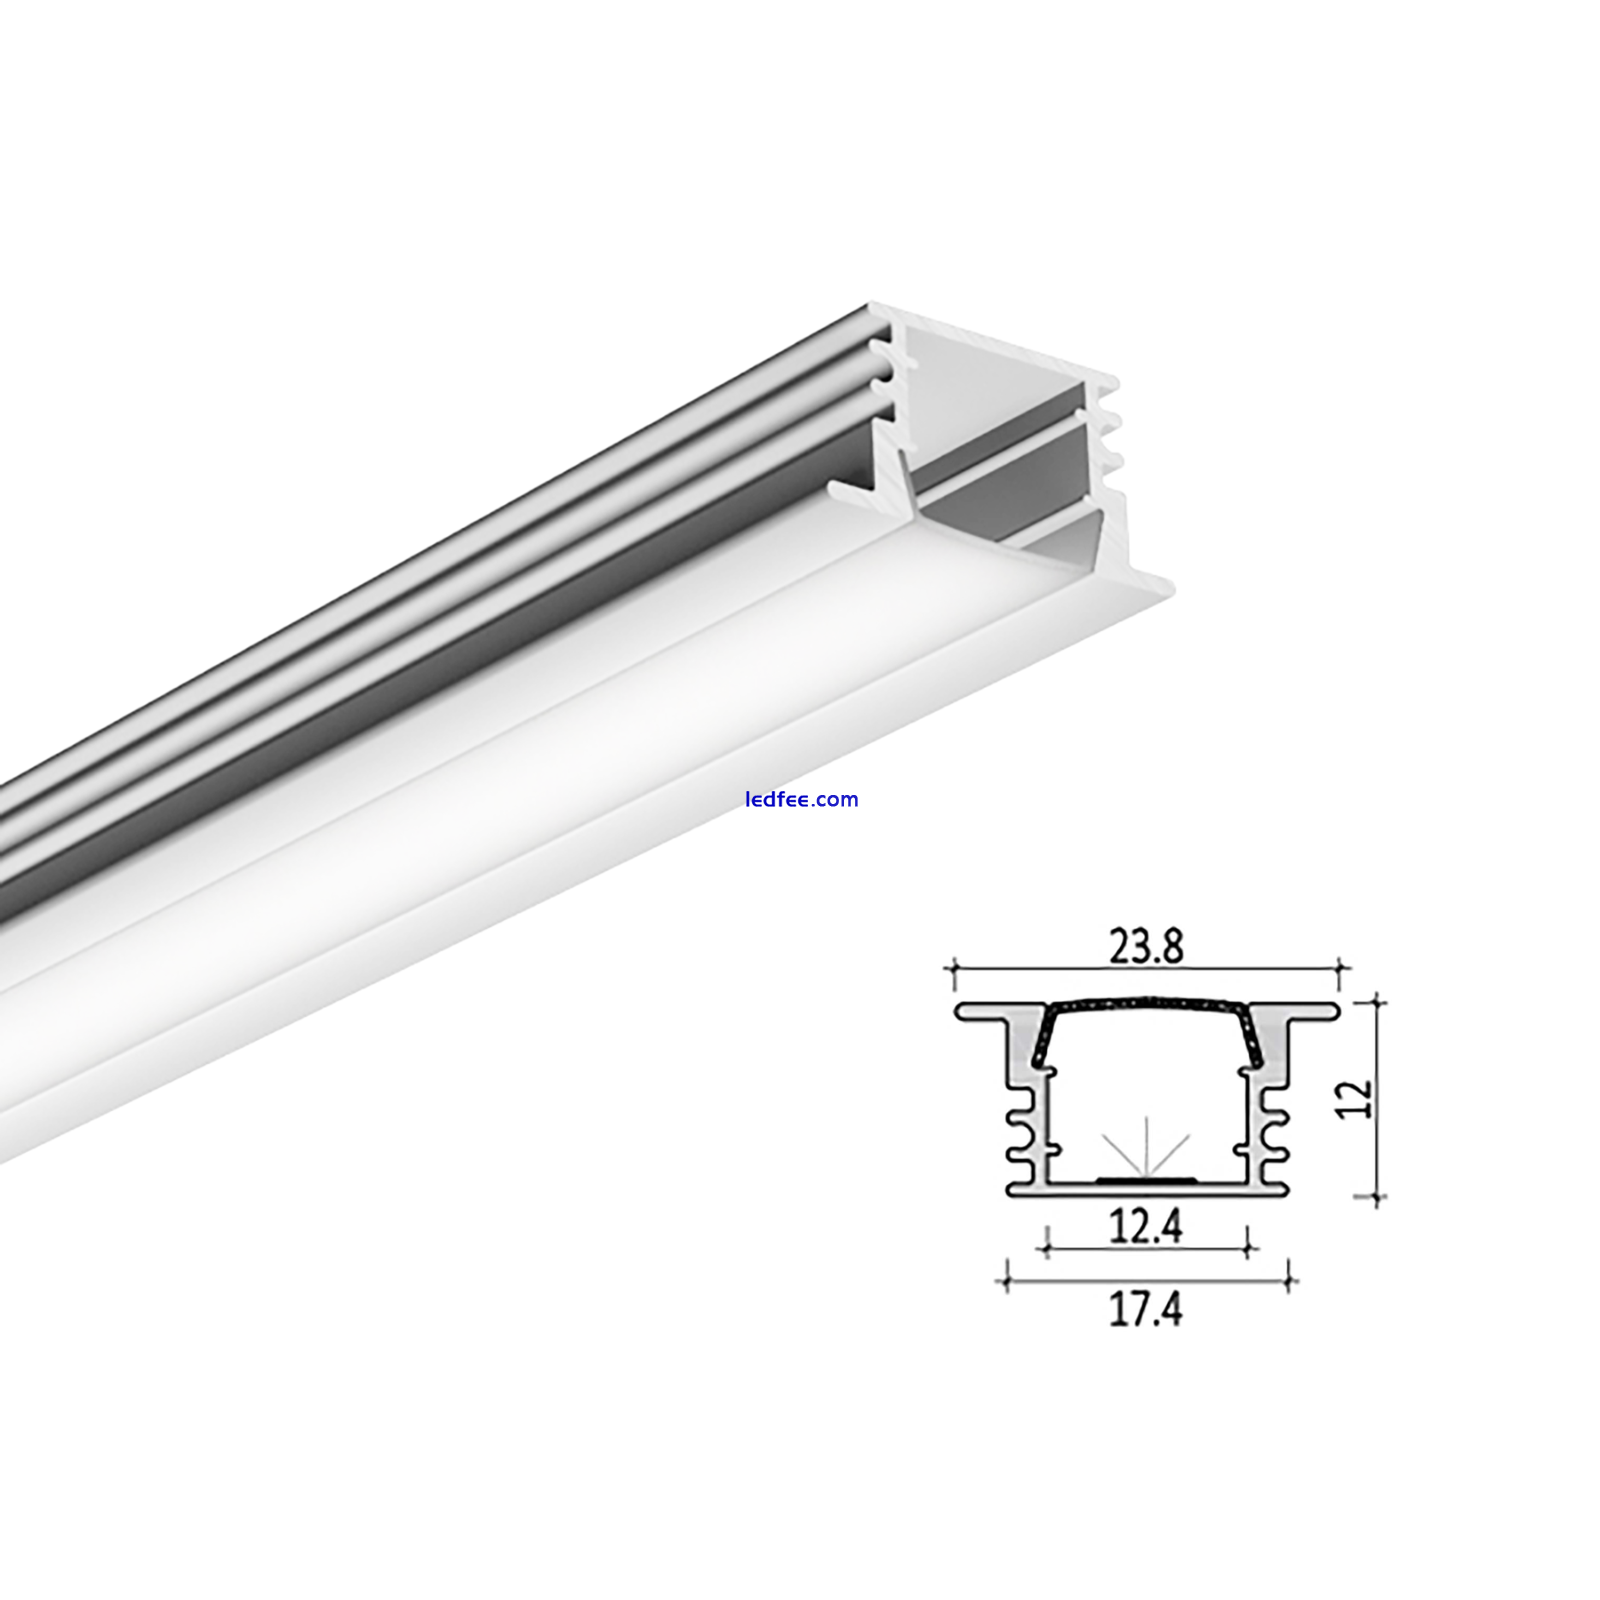 1M 2M LED Profile Aluminium Channel Extrusion Housing Track For LED Strip Light 0 